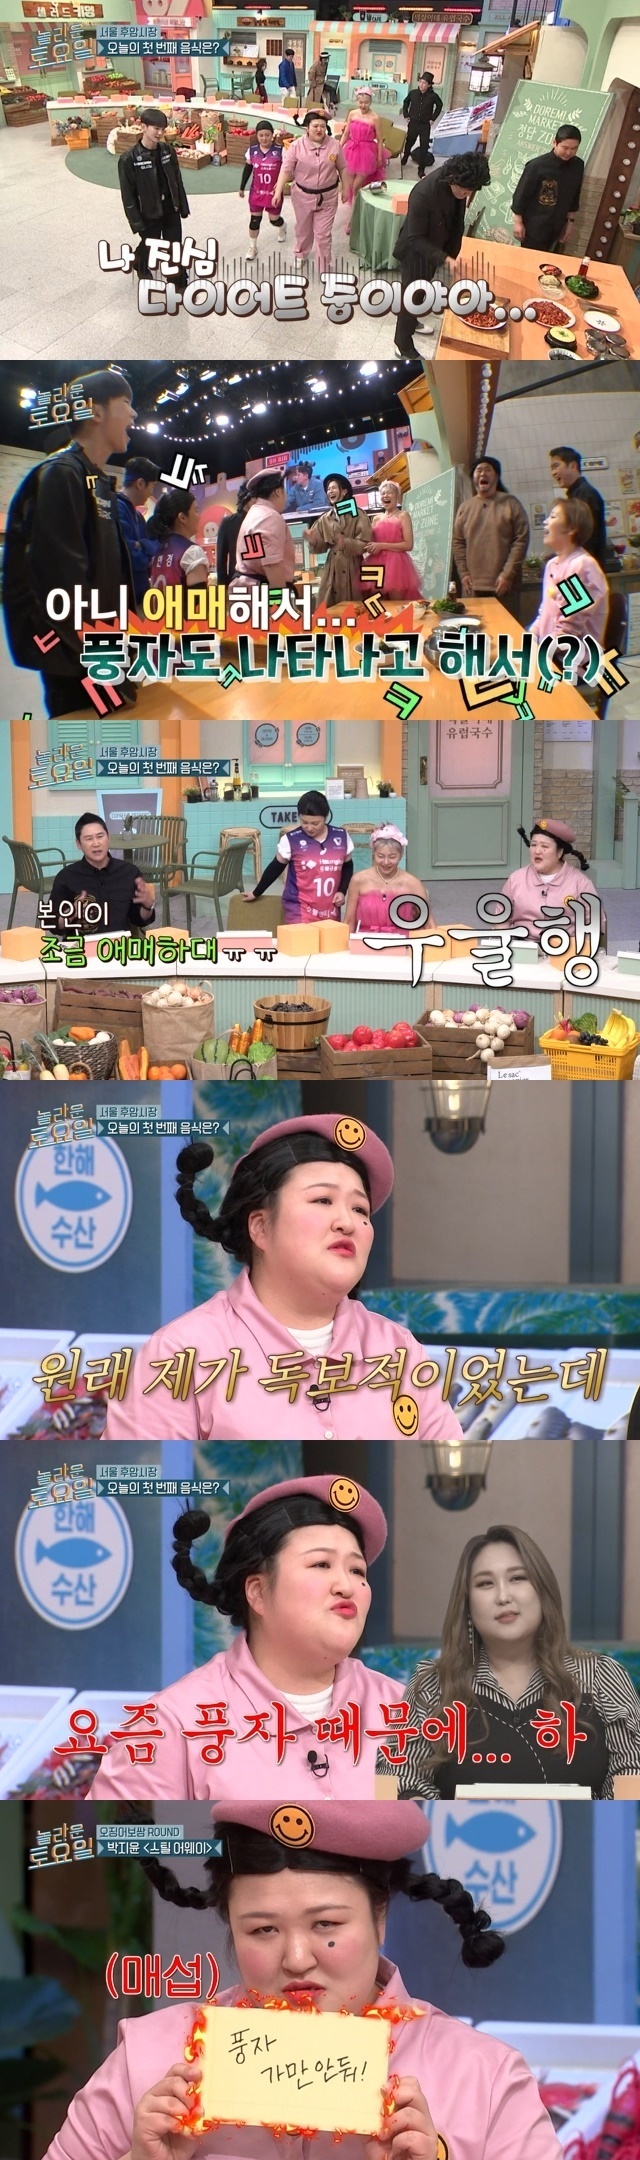 Comedian Lee Guk-joo has revealed his reasons for doing Diet.Lee Hyun-yi, Lee Guk-joo and Songhai appeared as guests in the 259th episode of tvN entertainment show Amazing Saturday - DoReMi Market (hereinafter referred to as Amazing Saturday), which aired on April 15.On this day, Lee Guk-joo was saddened when the squid bossam food was released, saying, I am in a hearty Diet.Lee Guk-joo was surprised by the news of Diet and said, No ambiguity.Lee Guk-joo said, I was a little unrivaled, but nowadays I can not win because Mr. satire appeared ambiguously. Mr. satire overlaps a lot. He likes to drink and likes it.Park Na-rae said, The market has become fierce, and Boom said, Satire is also completely complete when it passes nowadays. Lee Guk-joo said, Do you have to throw this away? I could not hide it.Lee Guk-joo laughed at the satire by sending a message to satire that he would not let the satire go even after receiving the one shot.